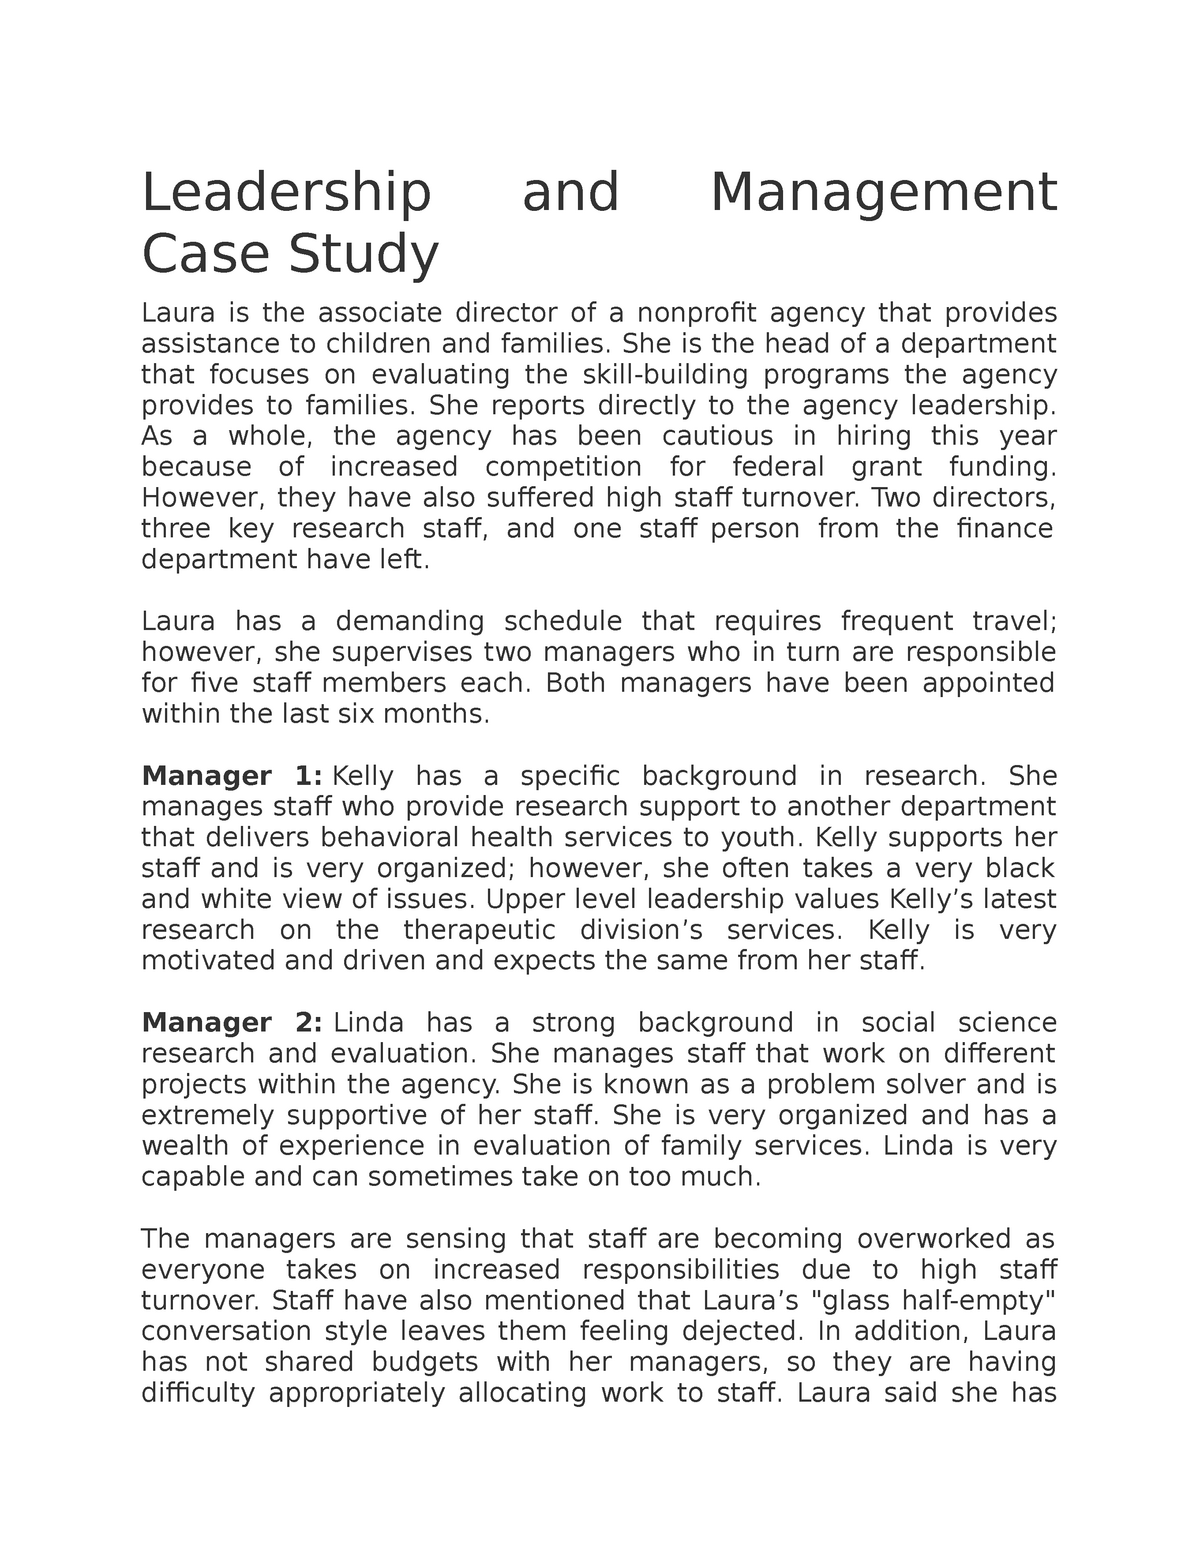 case study about managers